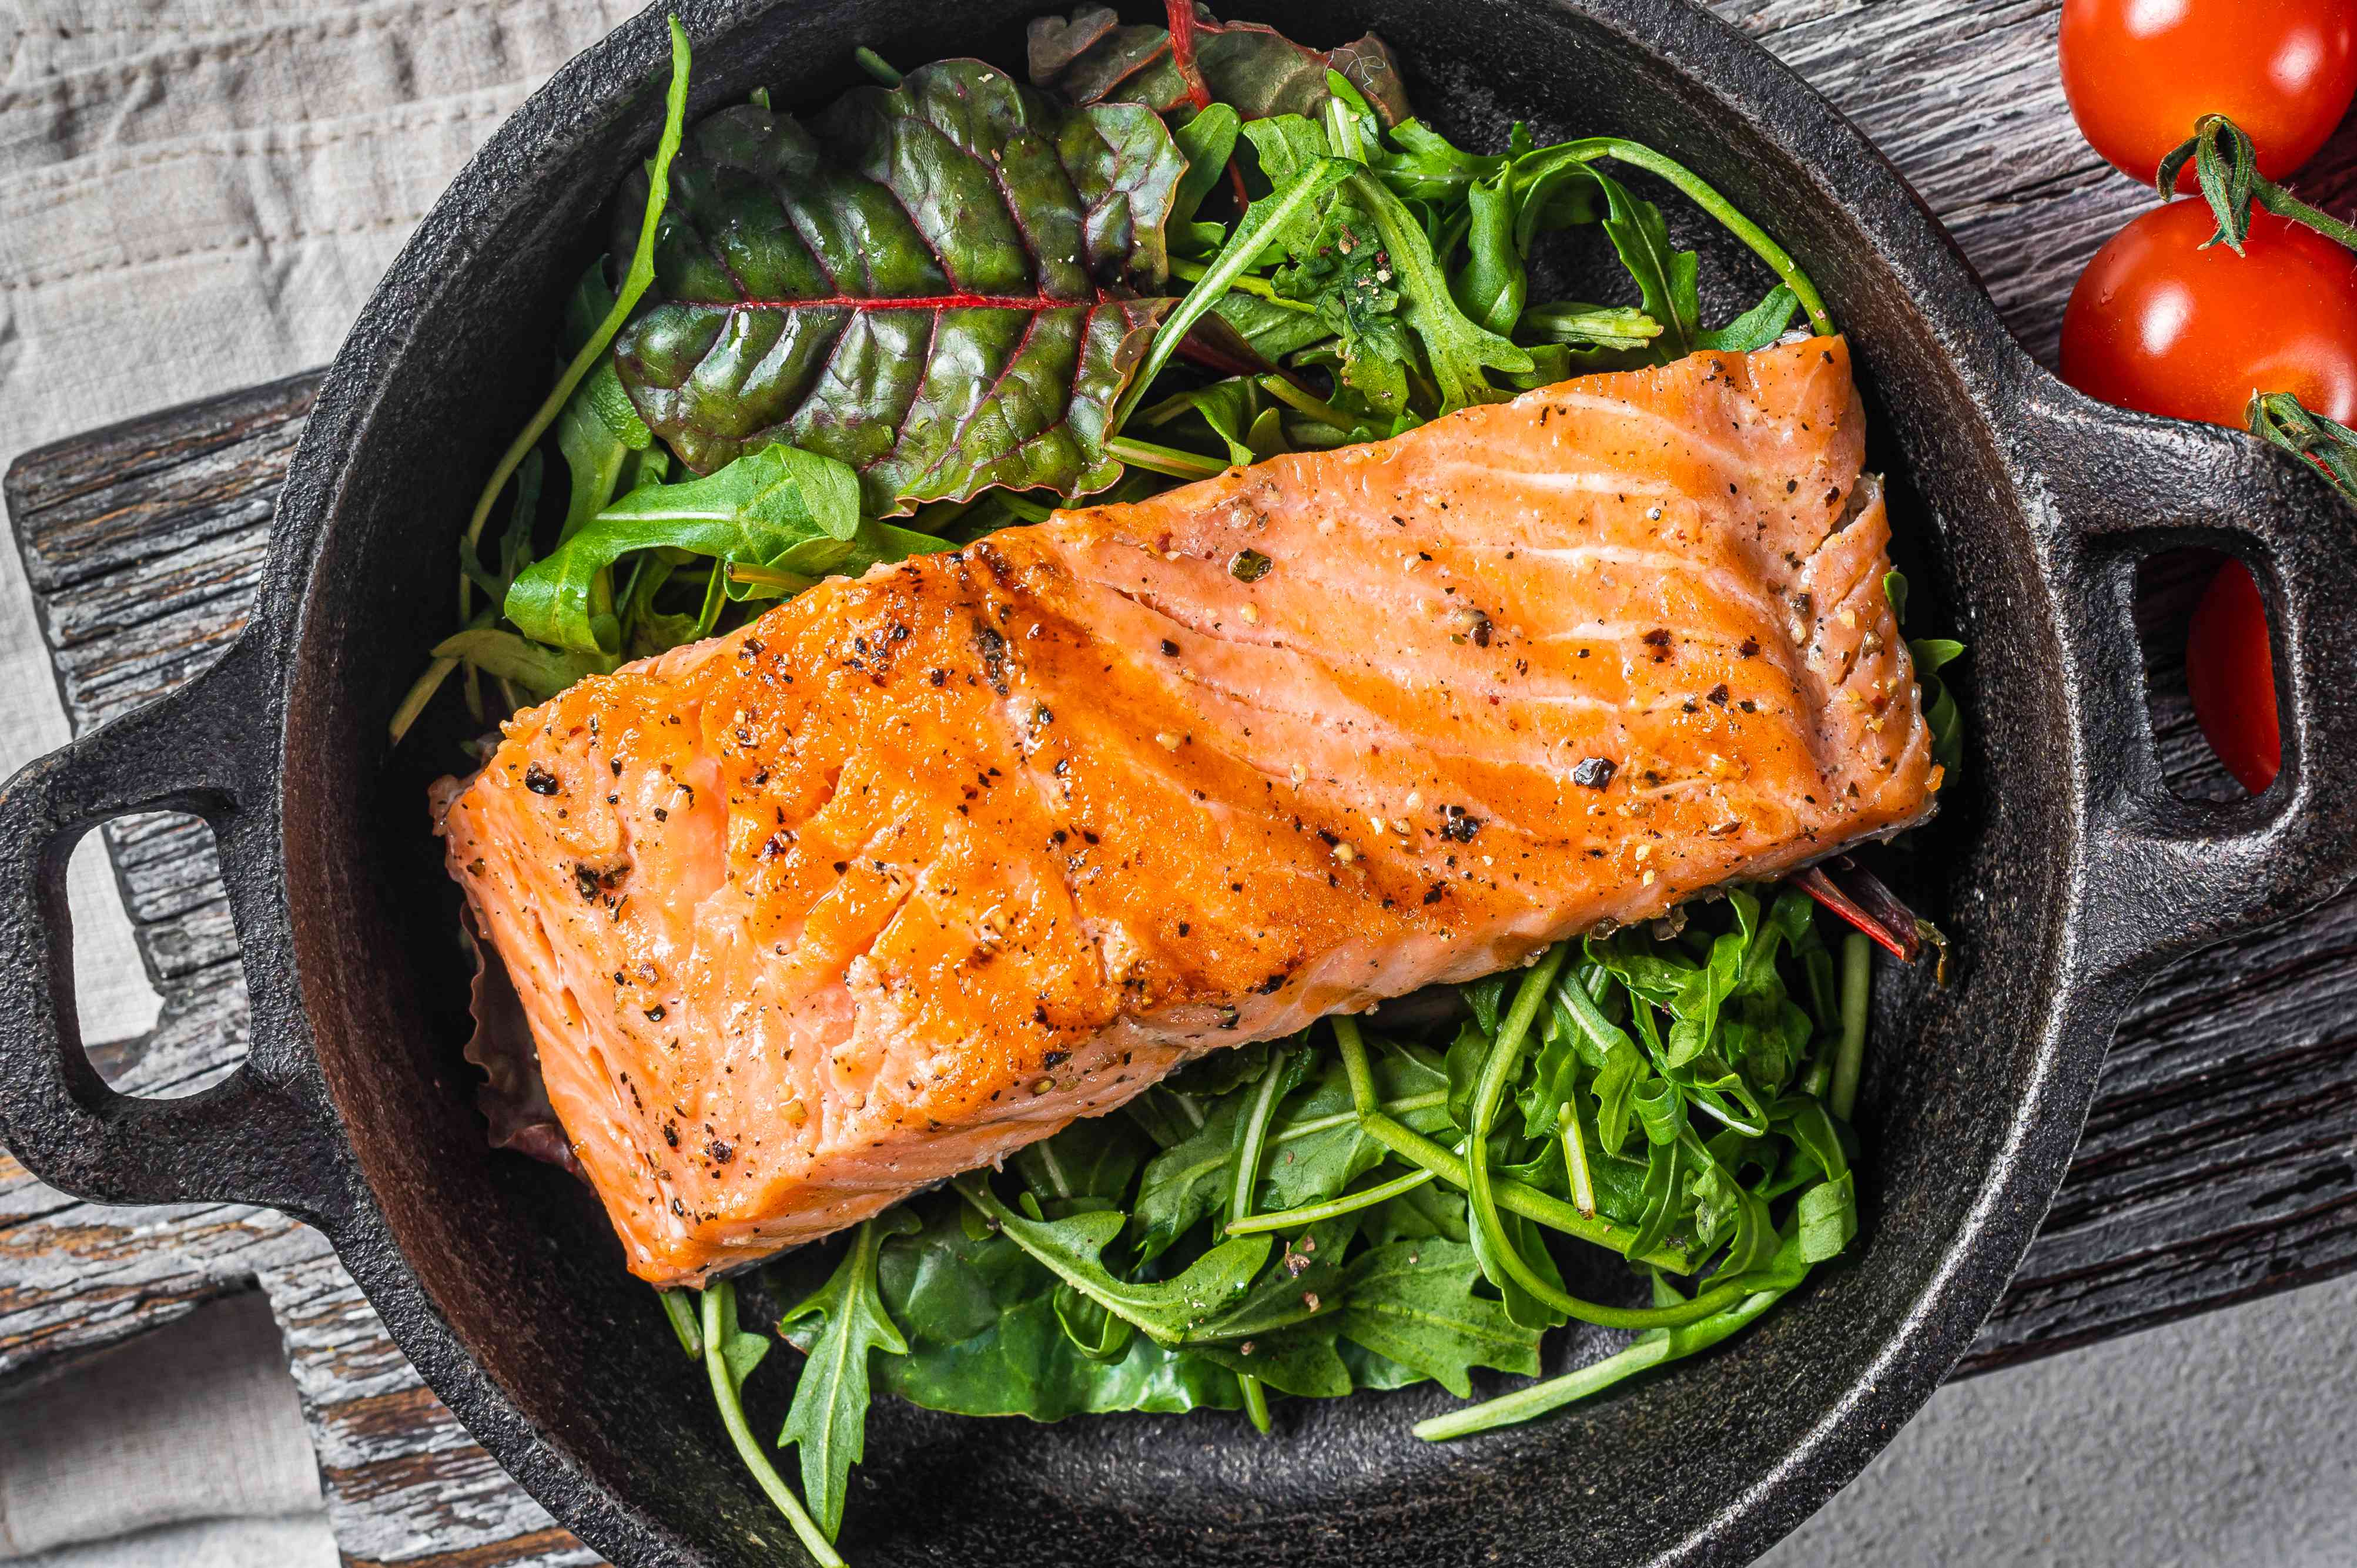 Should You Rinse Salmon Before Cooking? Here’s What the Experts Say